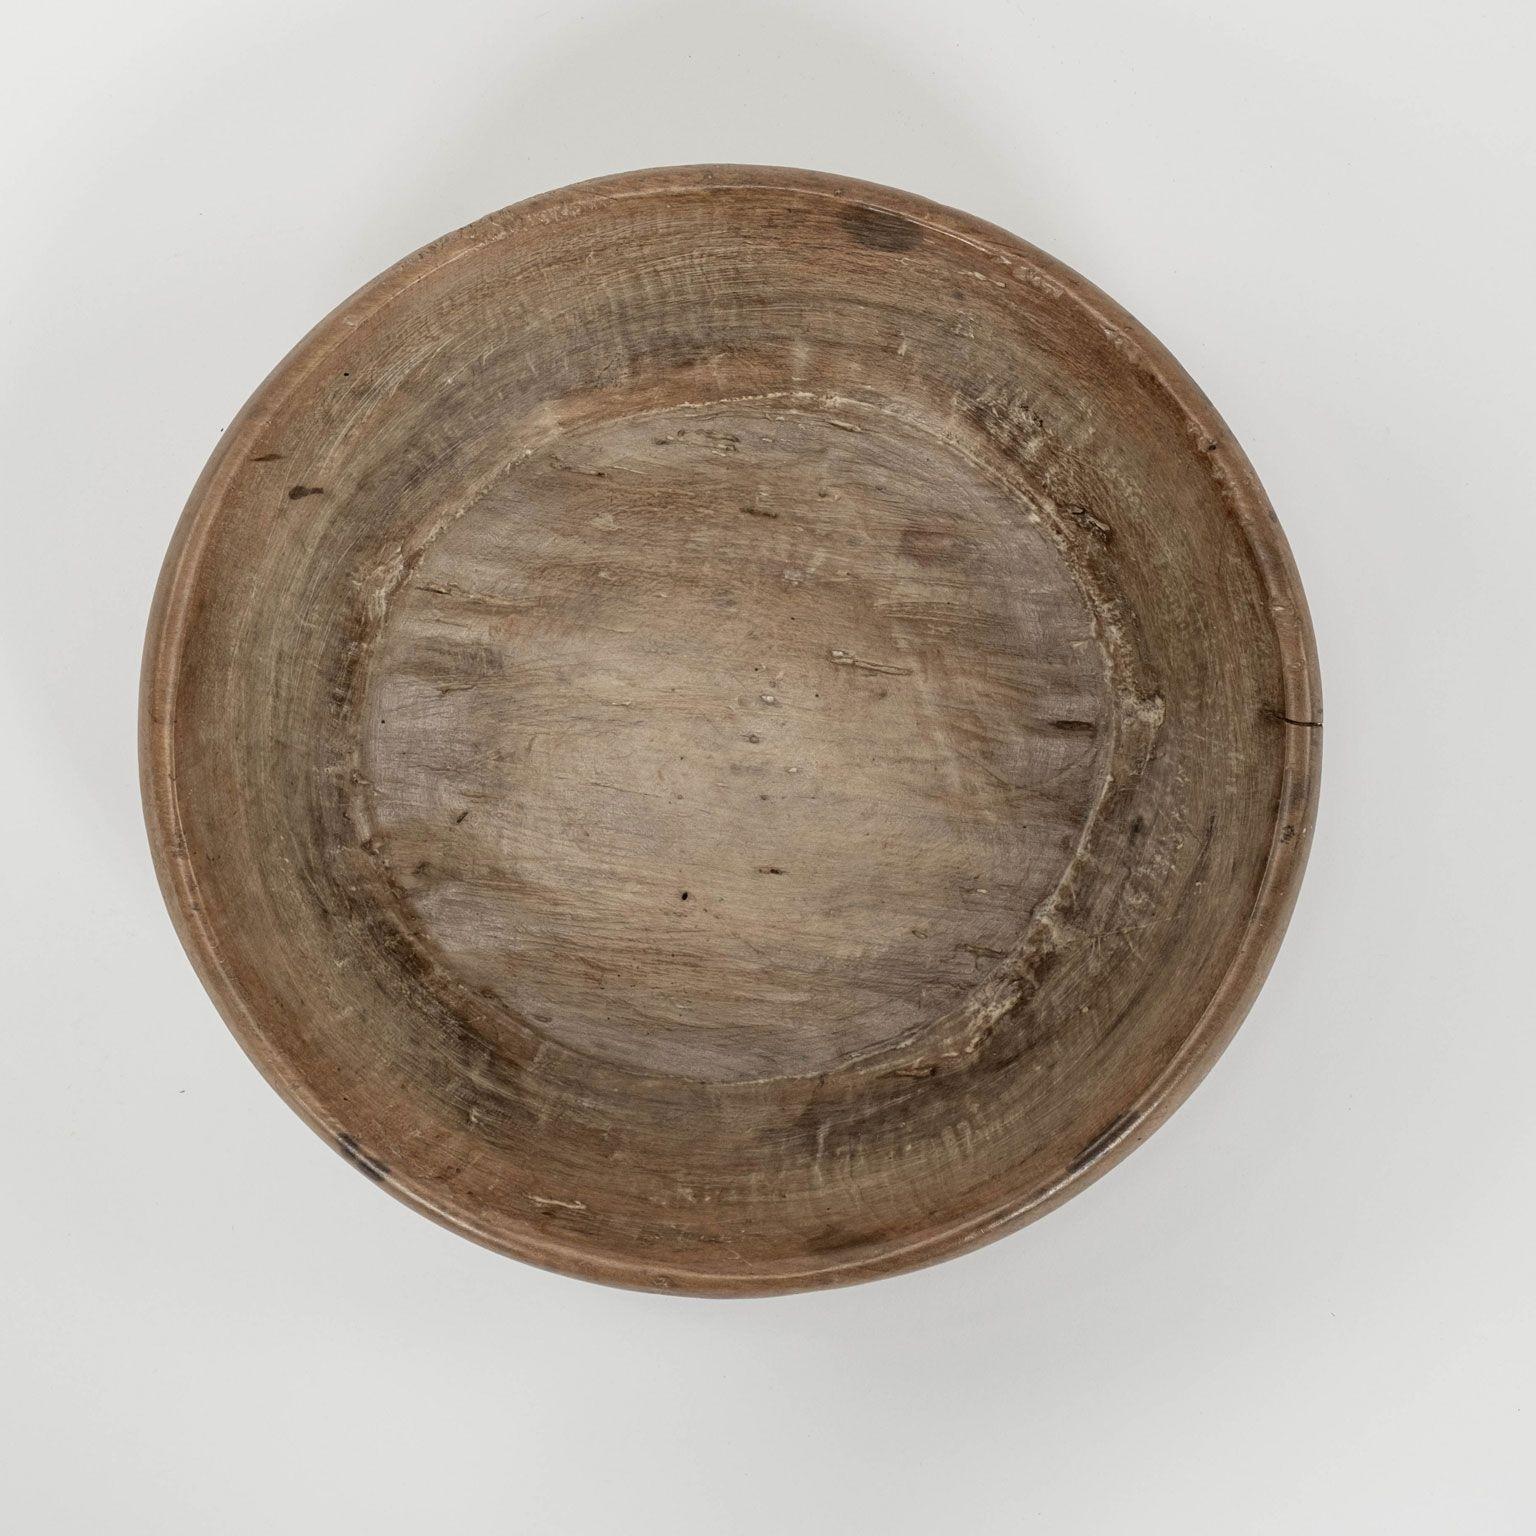 19th Century Rustic Swedish Turned Wooden Bowl in Waxed Finish